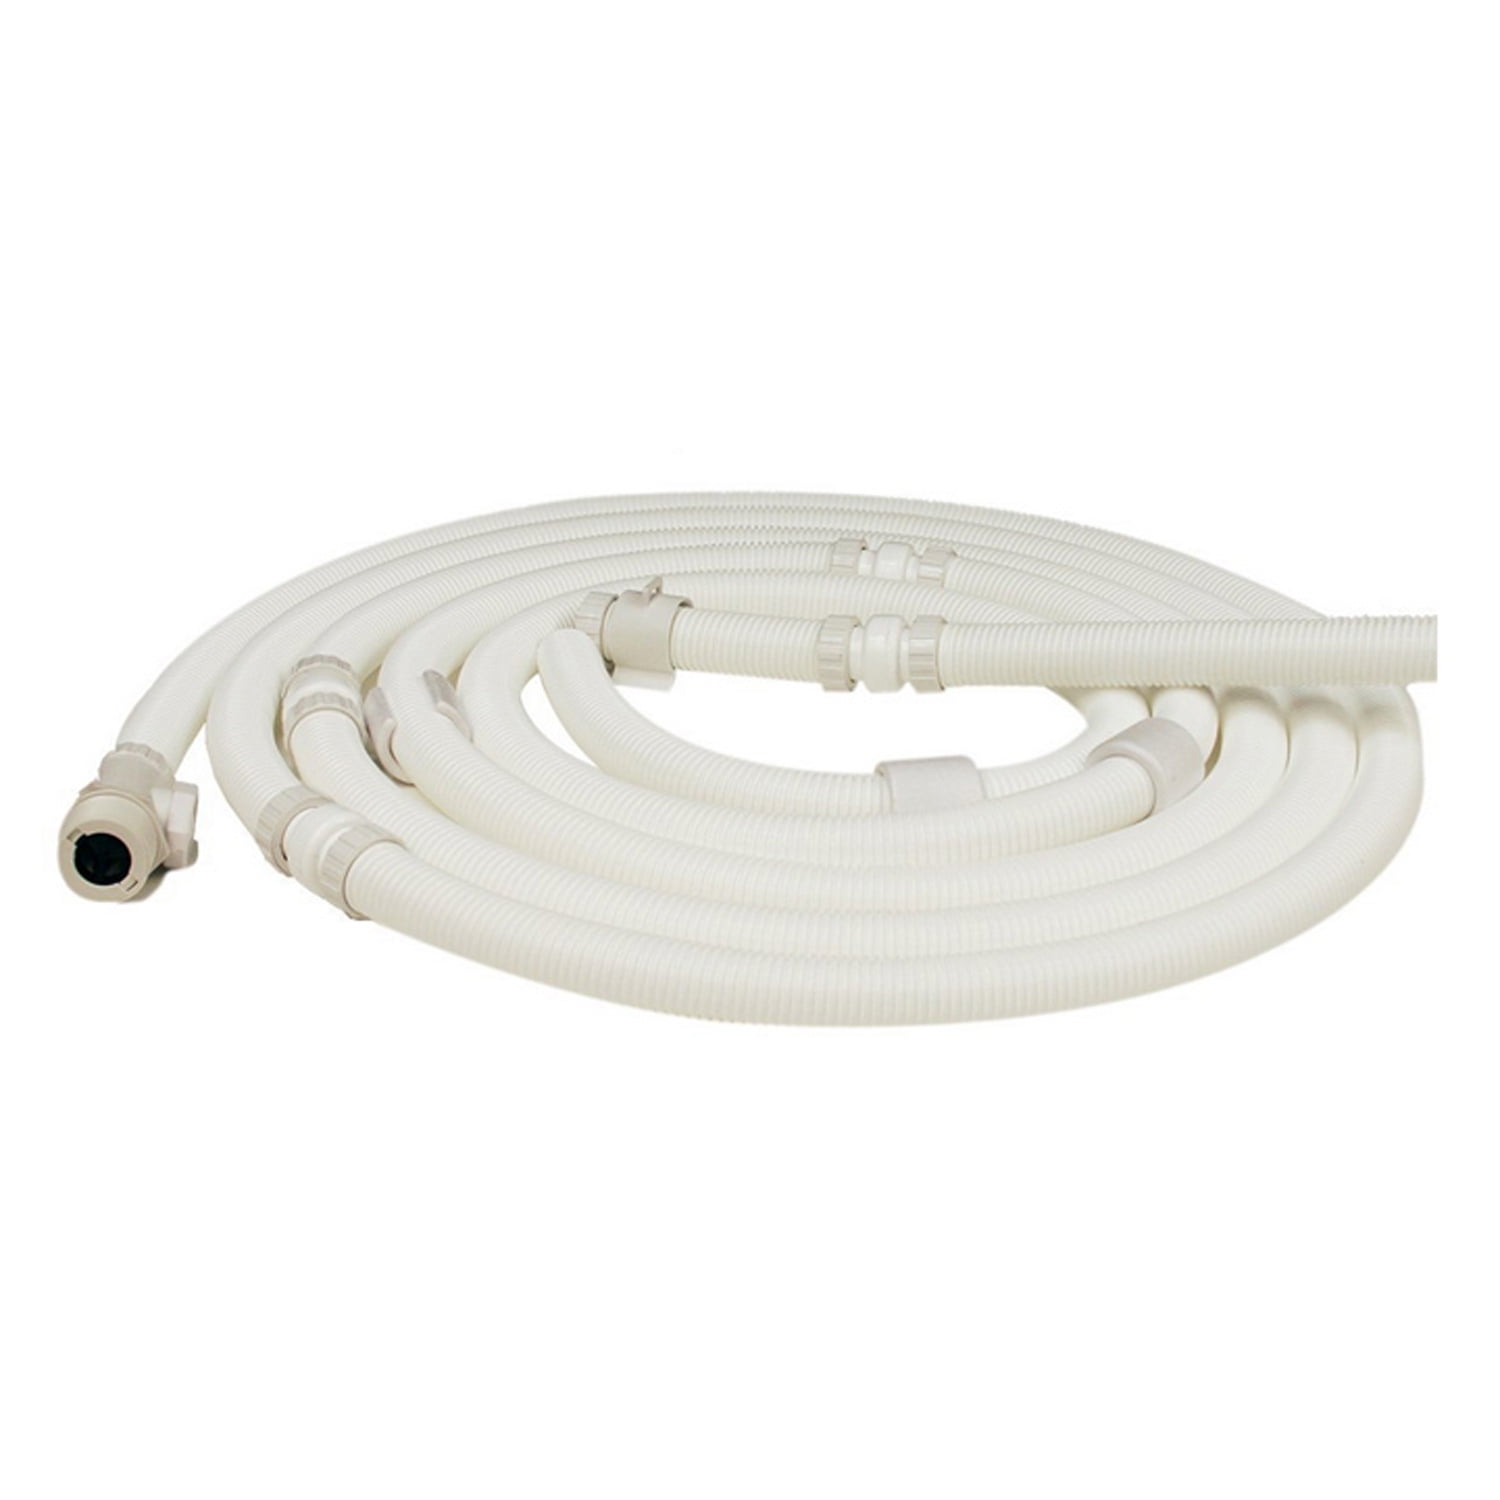 Polaris OEM 360 Pool Cleaner Feed Hose Complete with Floats UWF 9-100-3100 